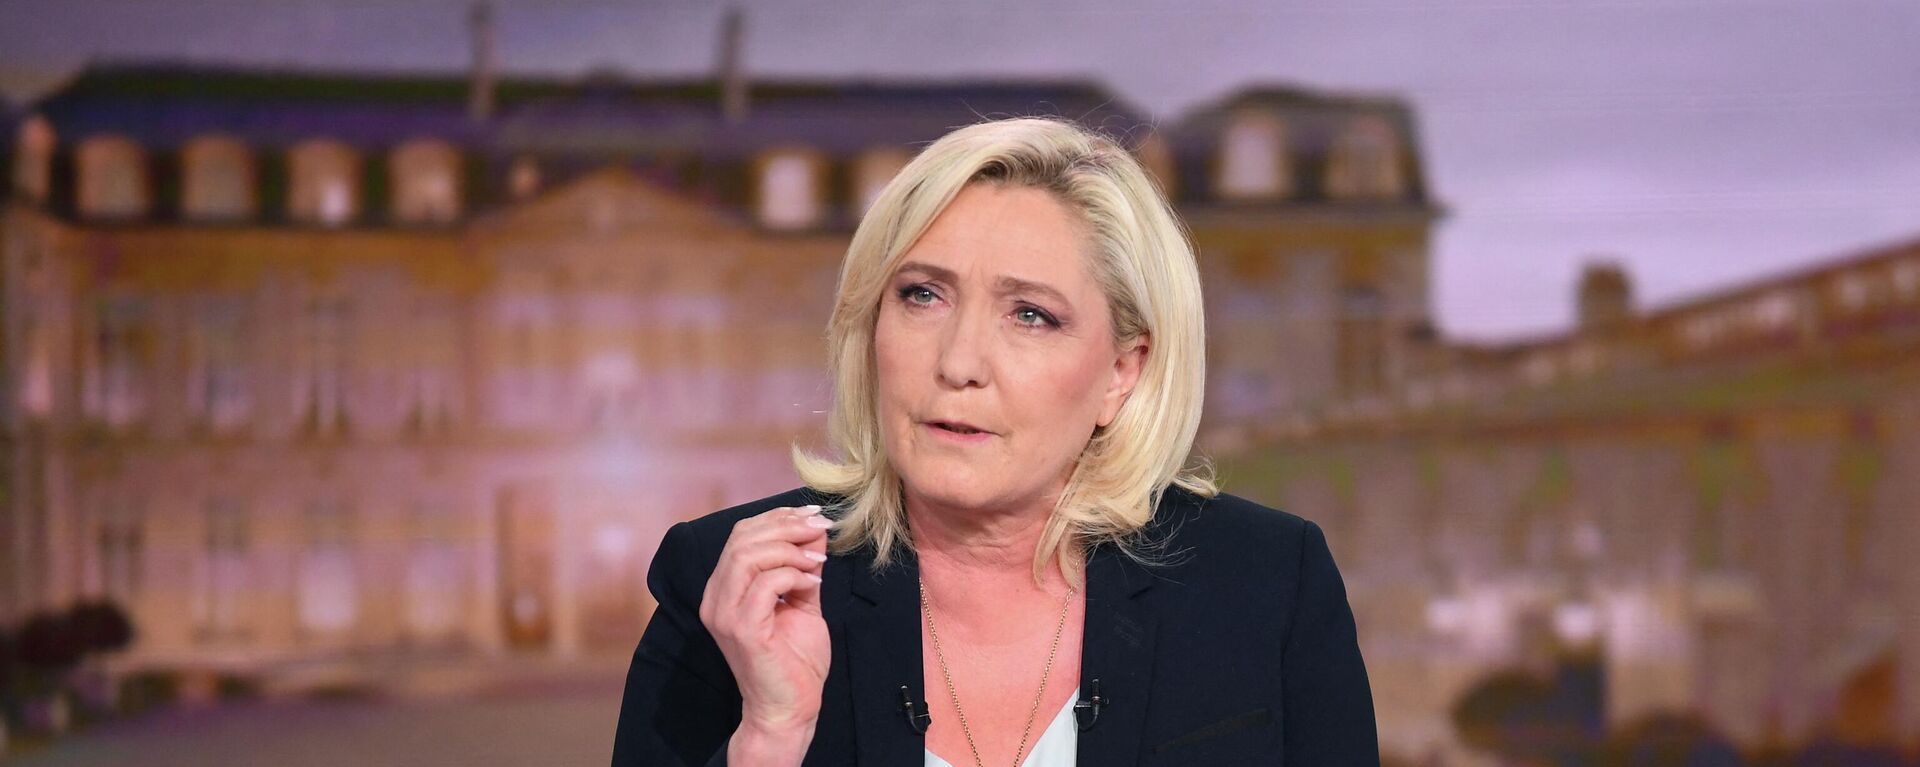 French far-right party Rassemblement National (RN) presidential candidate Marine Le Pen takes part in the evening news broadcast of French TV channel TF1, in Boulogne-Billancourt, outside Paris, on April 12, 2022. - Sputnik International, 1920, 13.04.2022